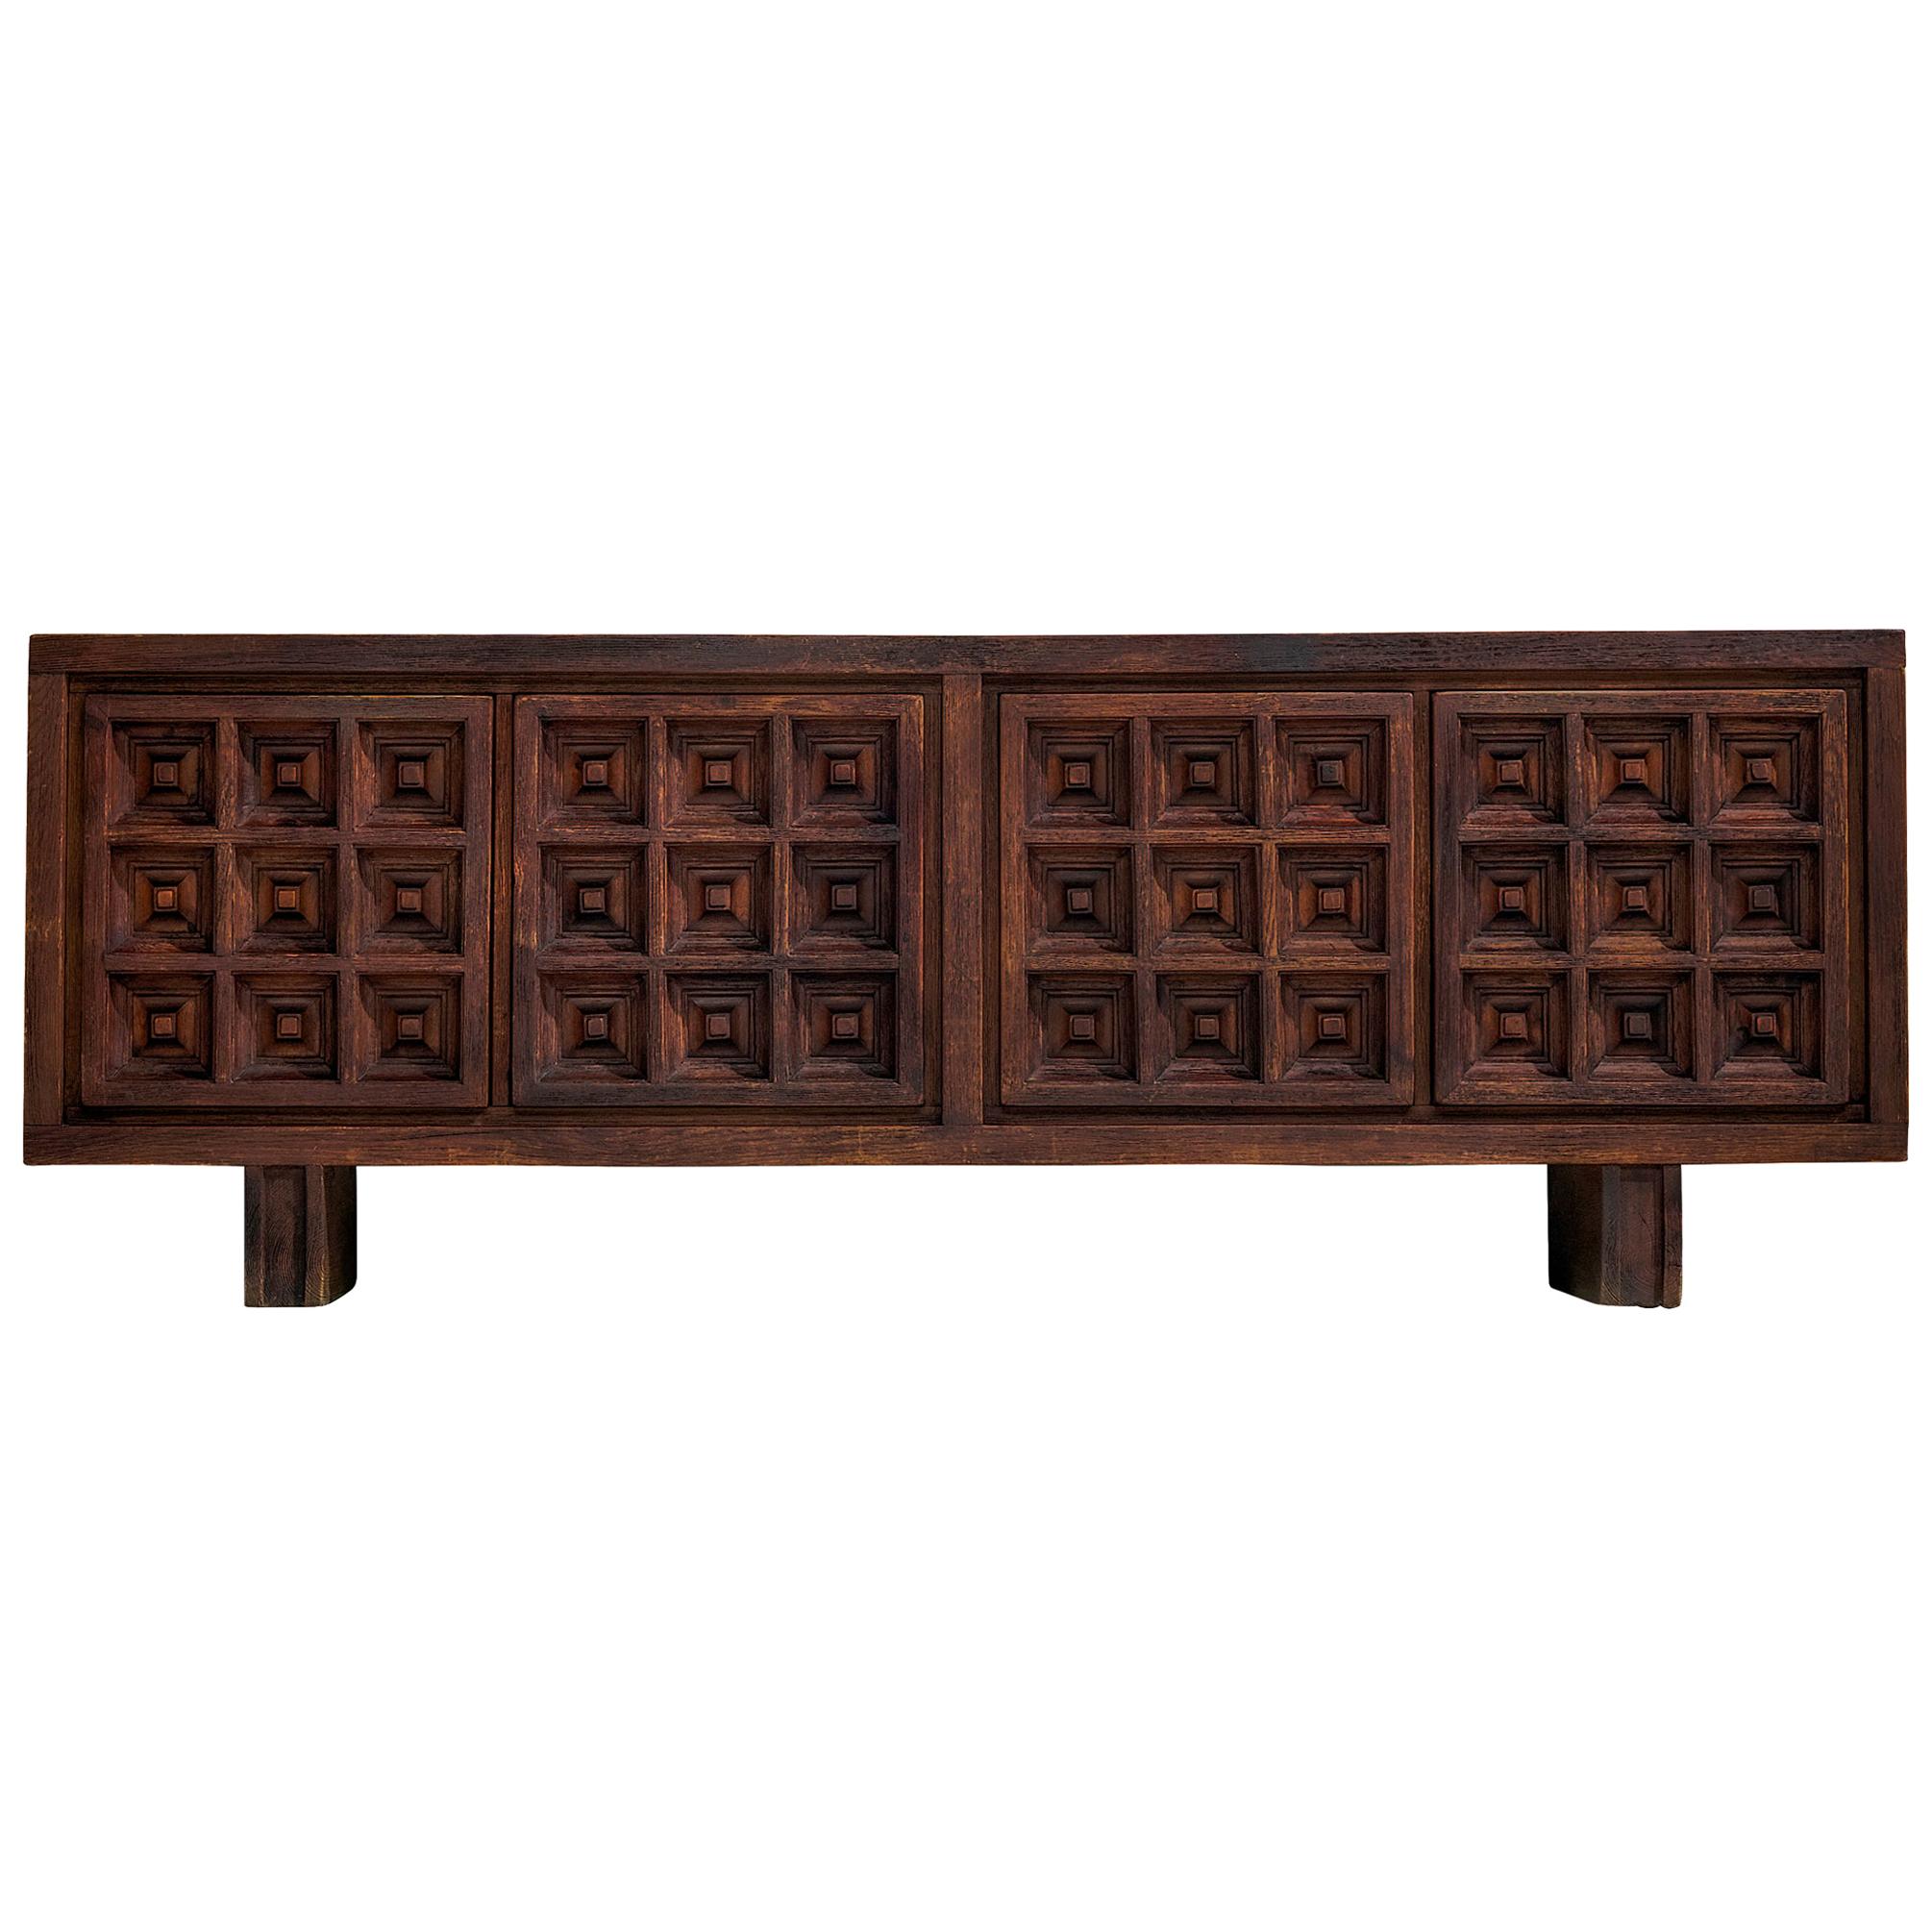 Spanish Sideboard in Stained Pine Manufactured by Biosca